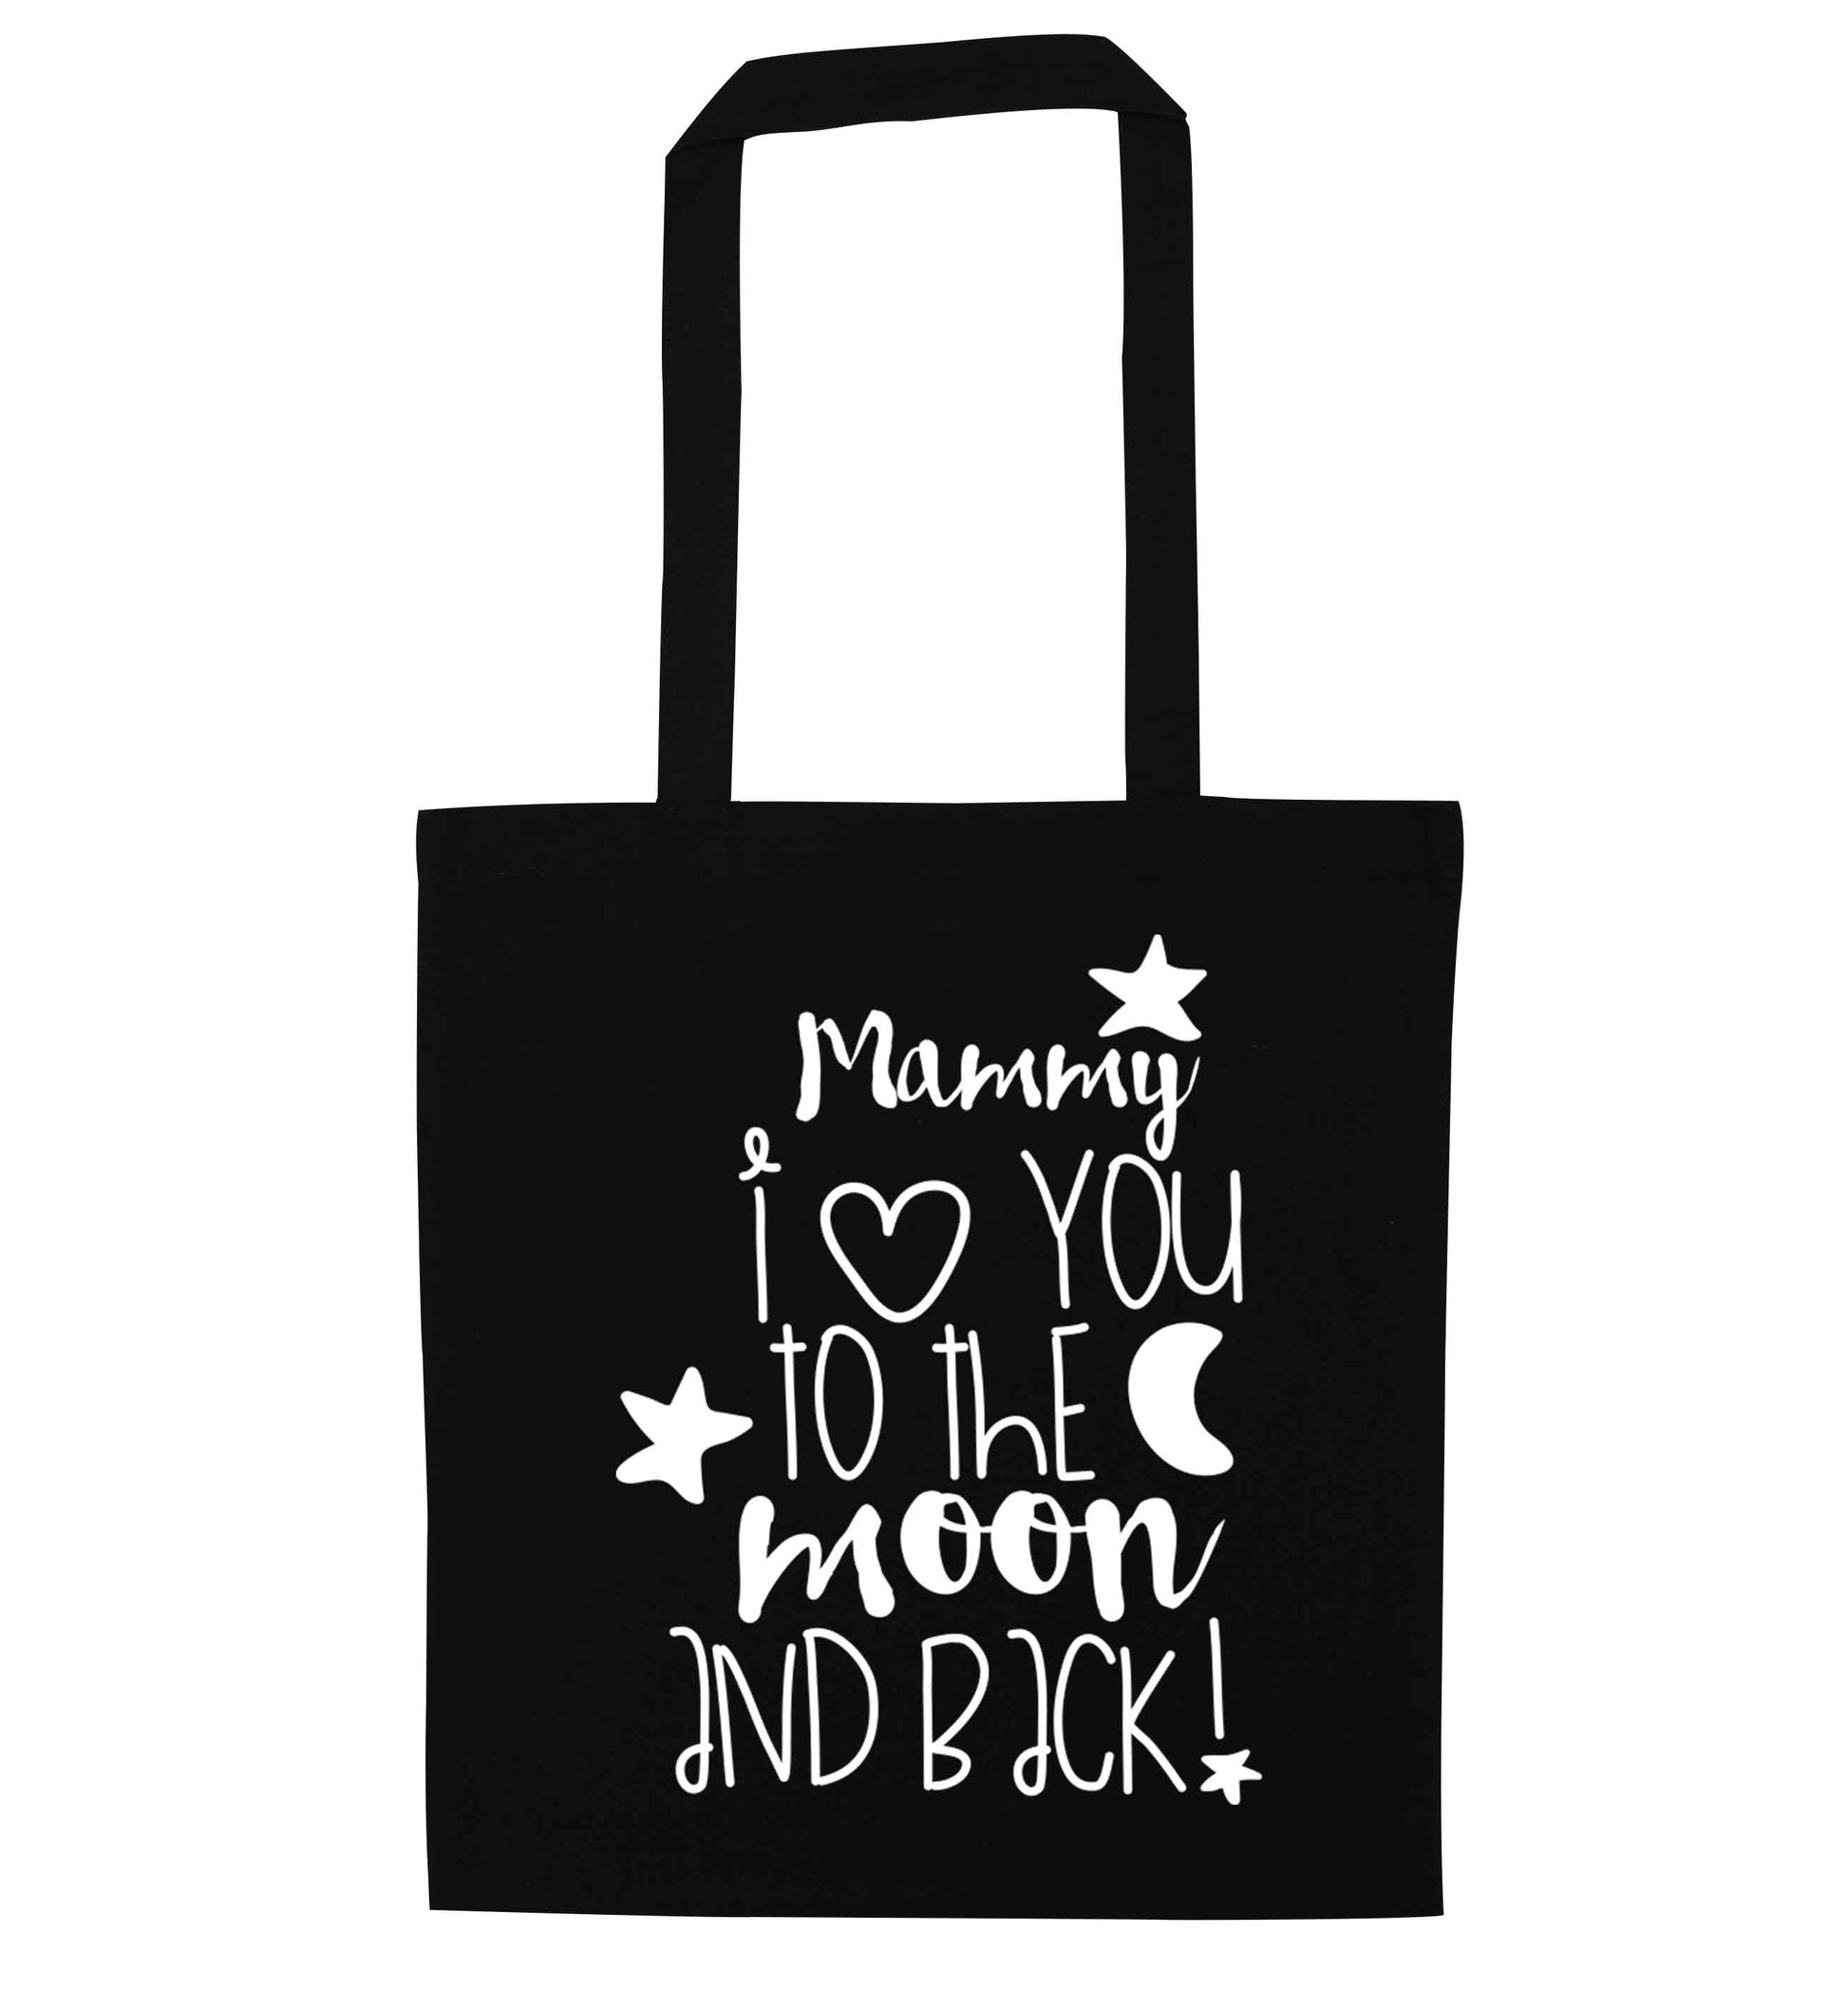 Mammy I love you to the moon and back black tote bag